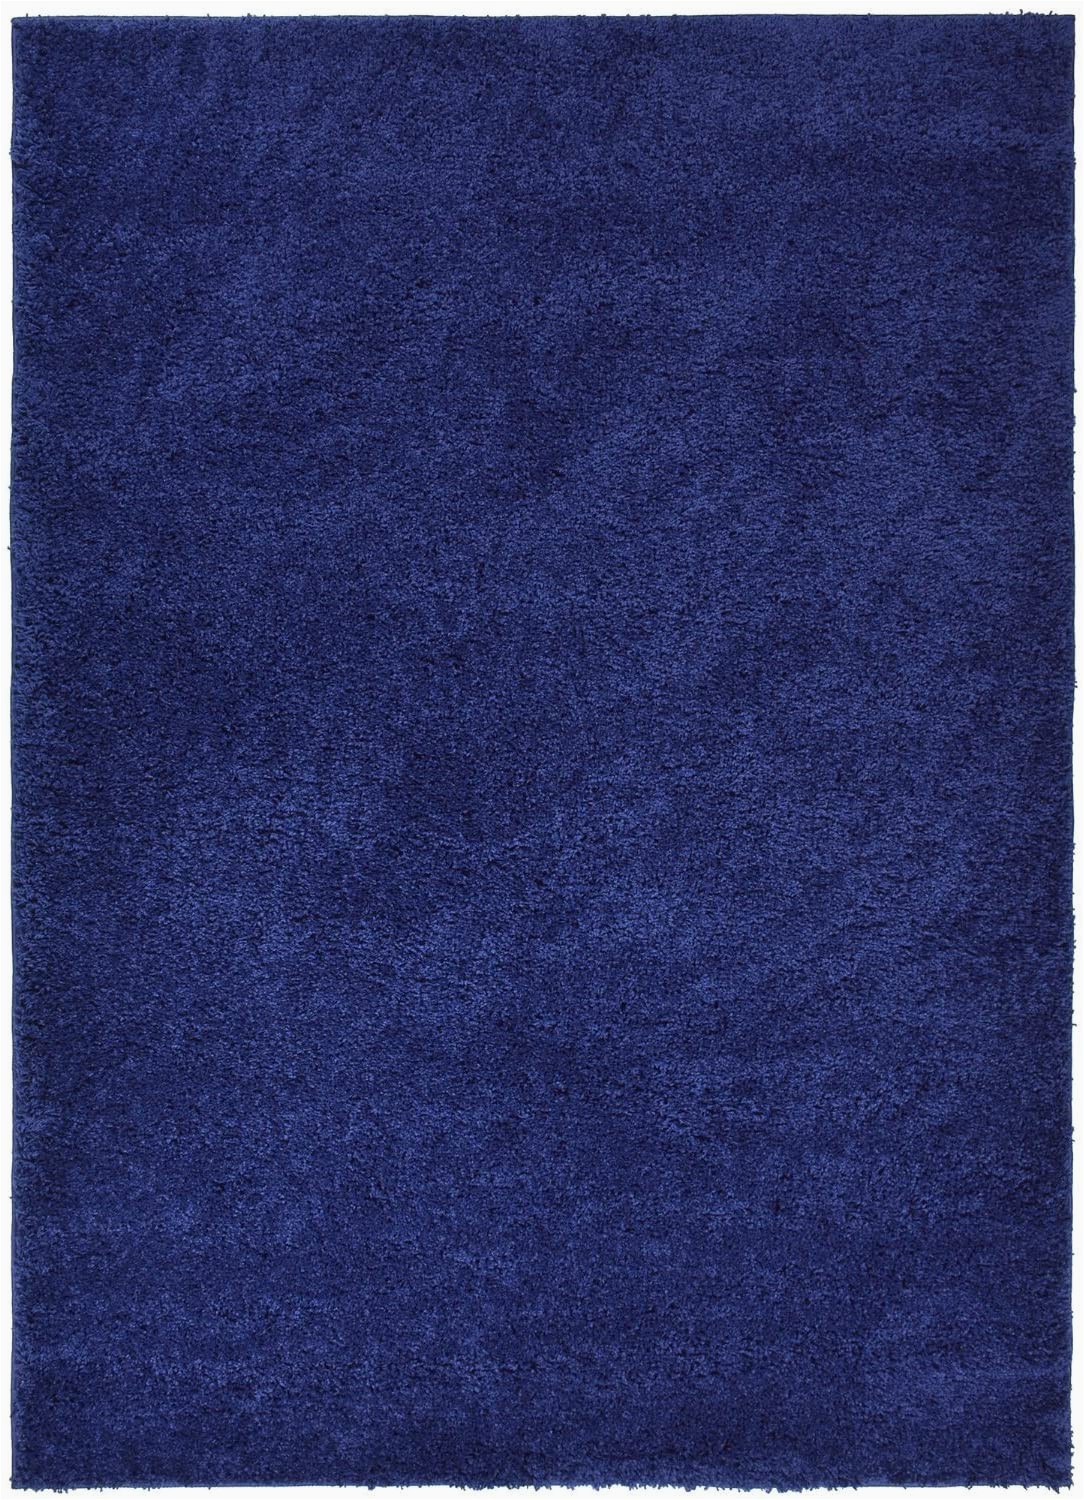 Cheap solid Color area Rugs Rugstyles Line soho Shaggy Collection solid Color Shag area Rug Rugs 7 Color Options Navy Blue